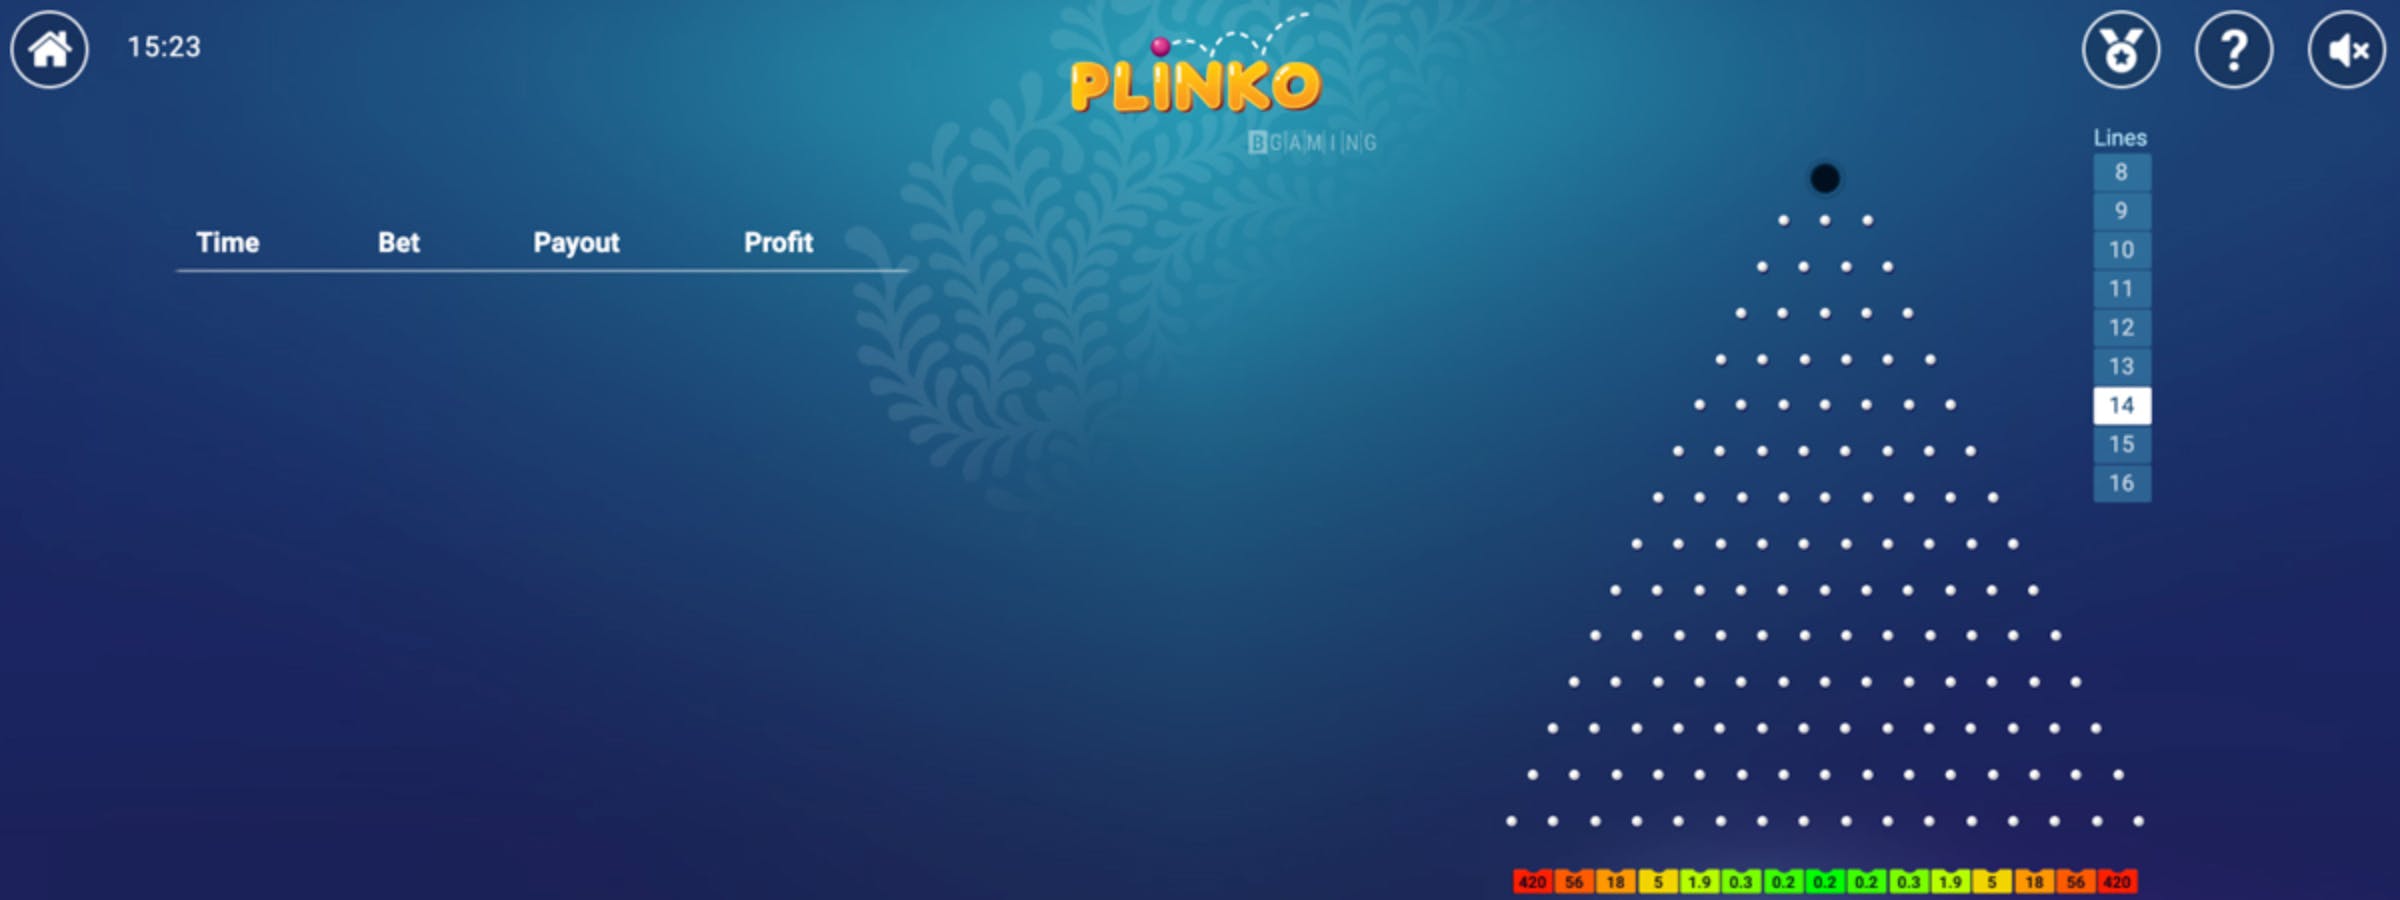 Plinko best guide: What you need to know to win